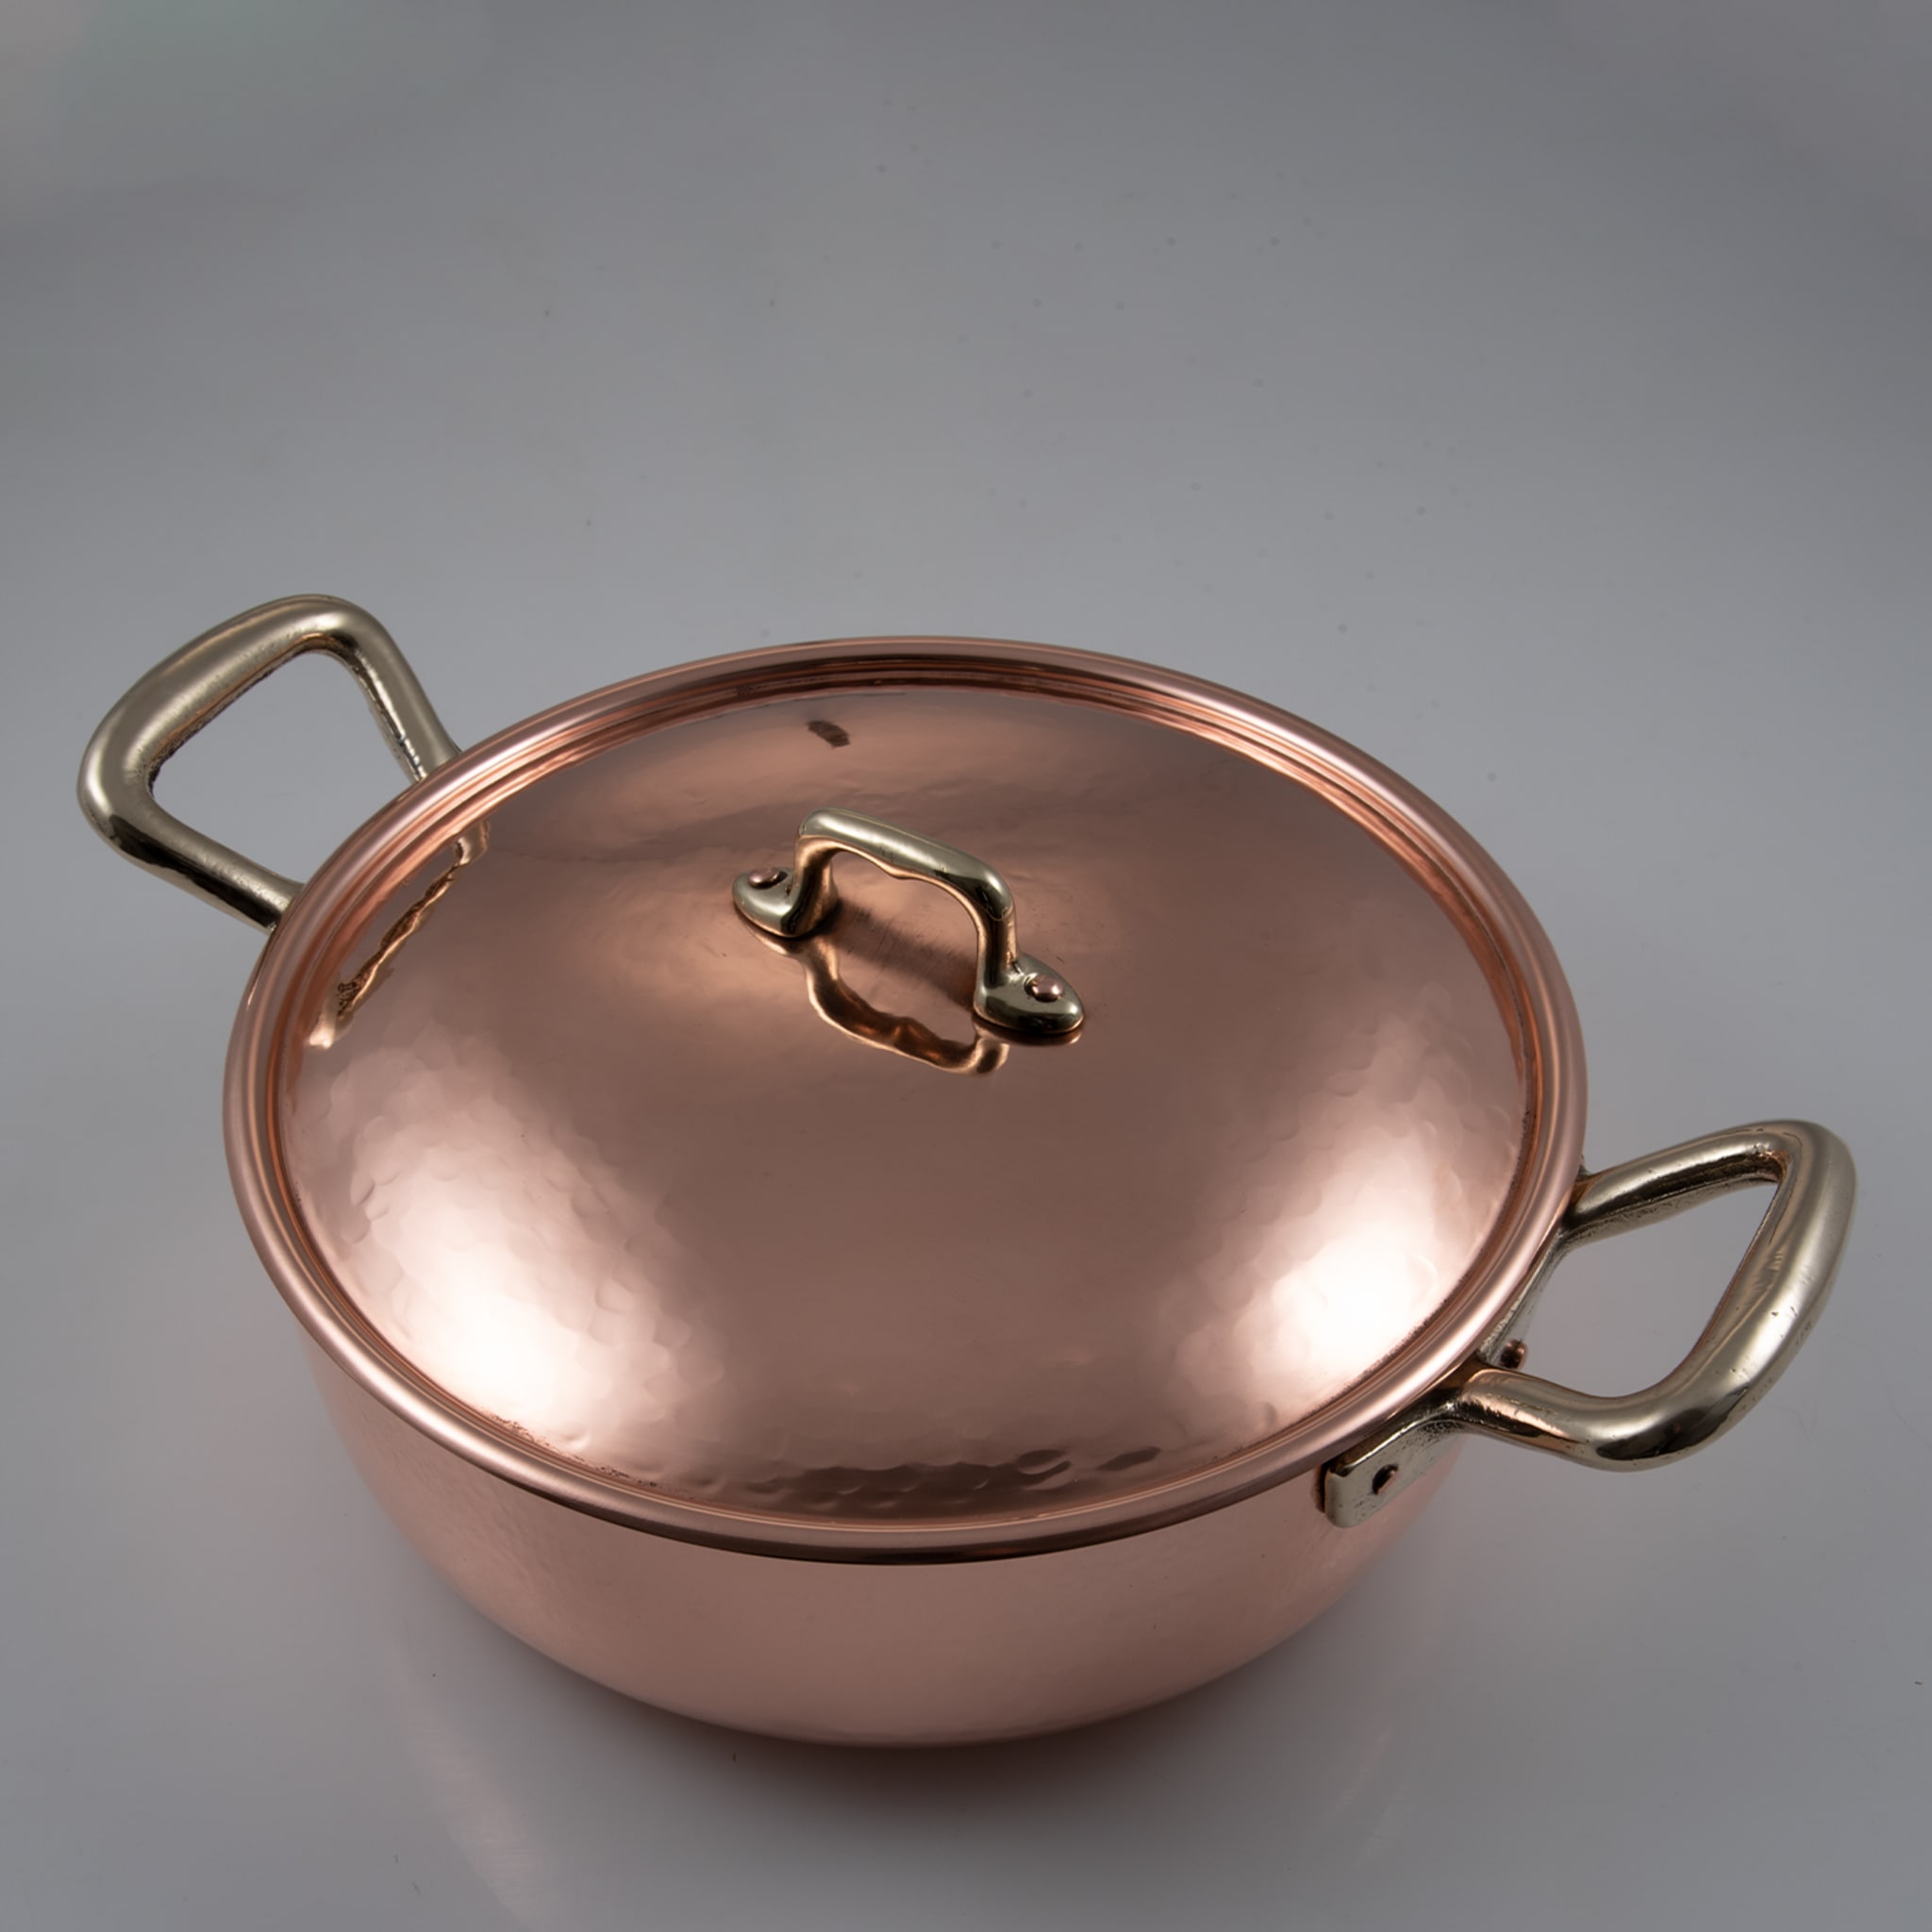 Silver lined 2-Handle Copper Pot with Lid #2 - Alternative view 2